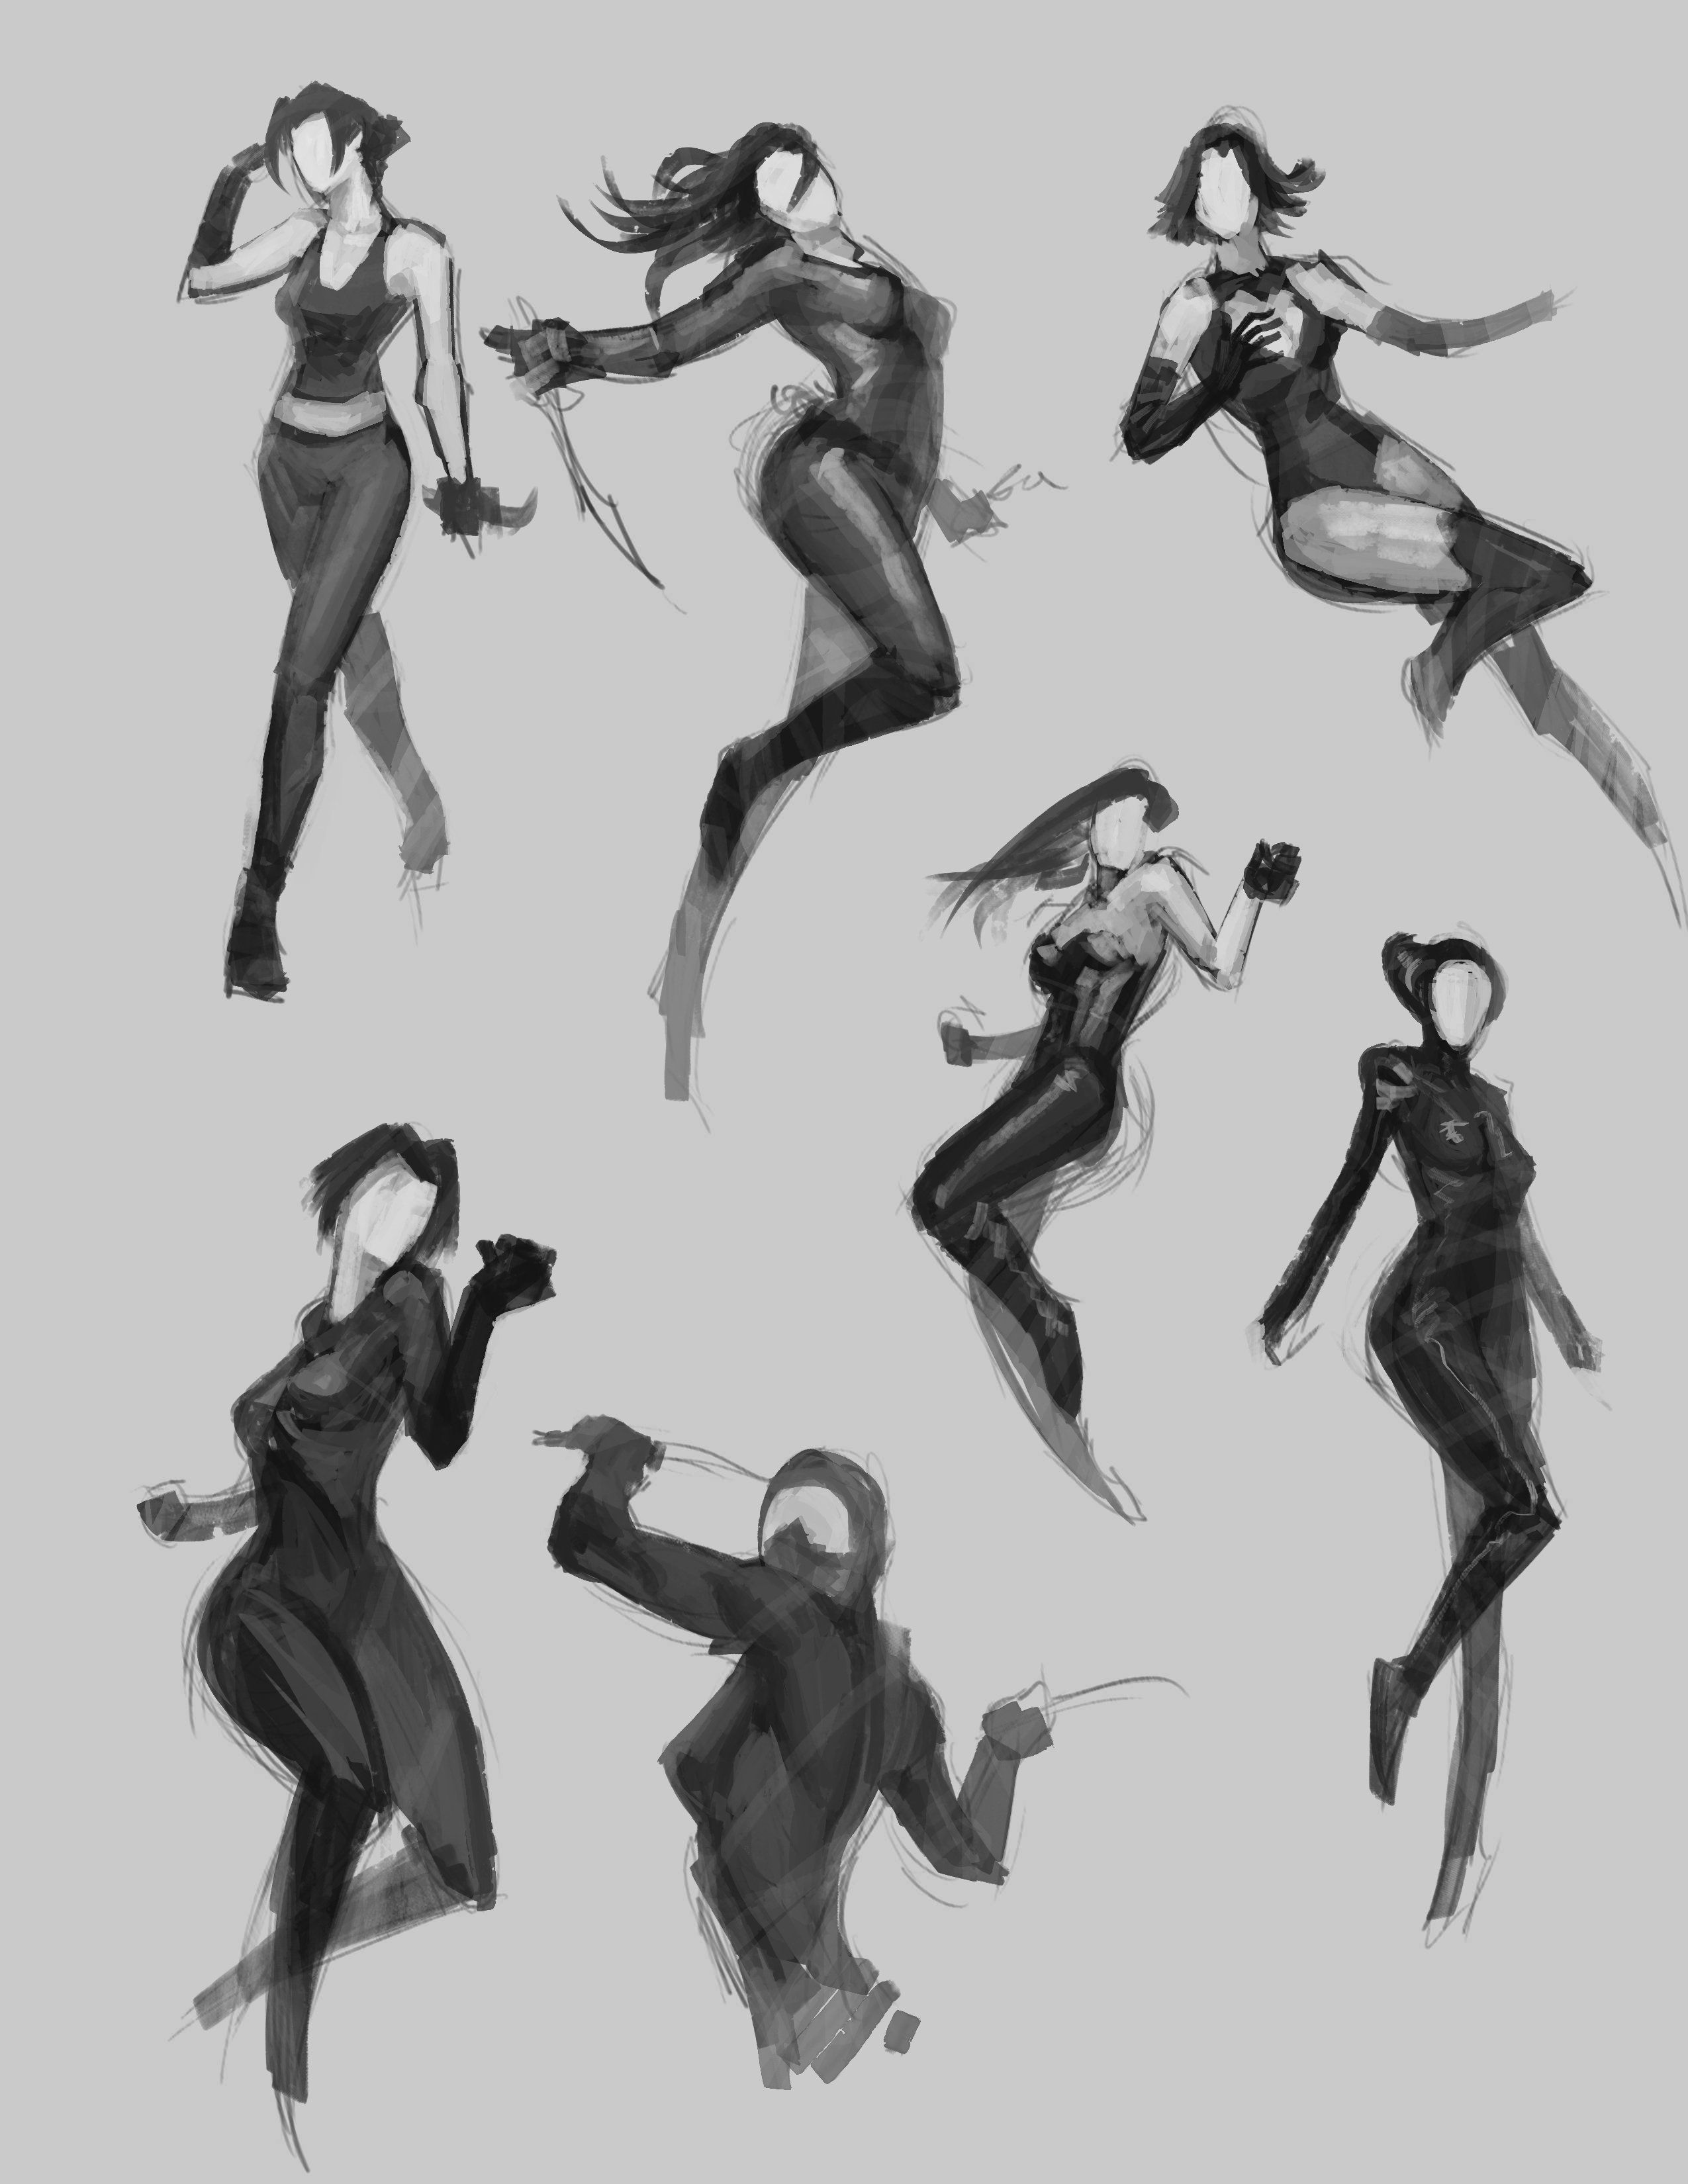 fast_pose_sketch_by_bmd247-d5l1nf7.jpg (2550×3300) | Poses ...